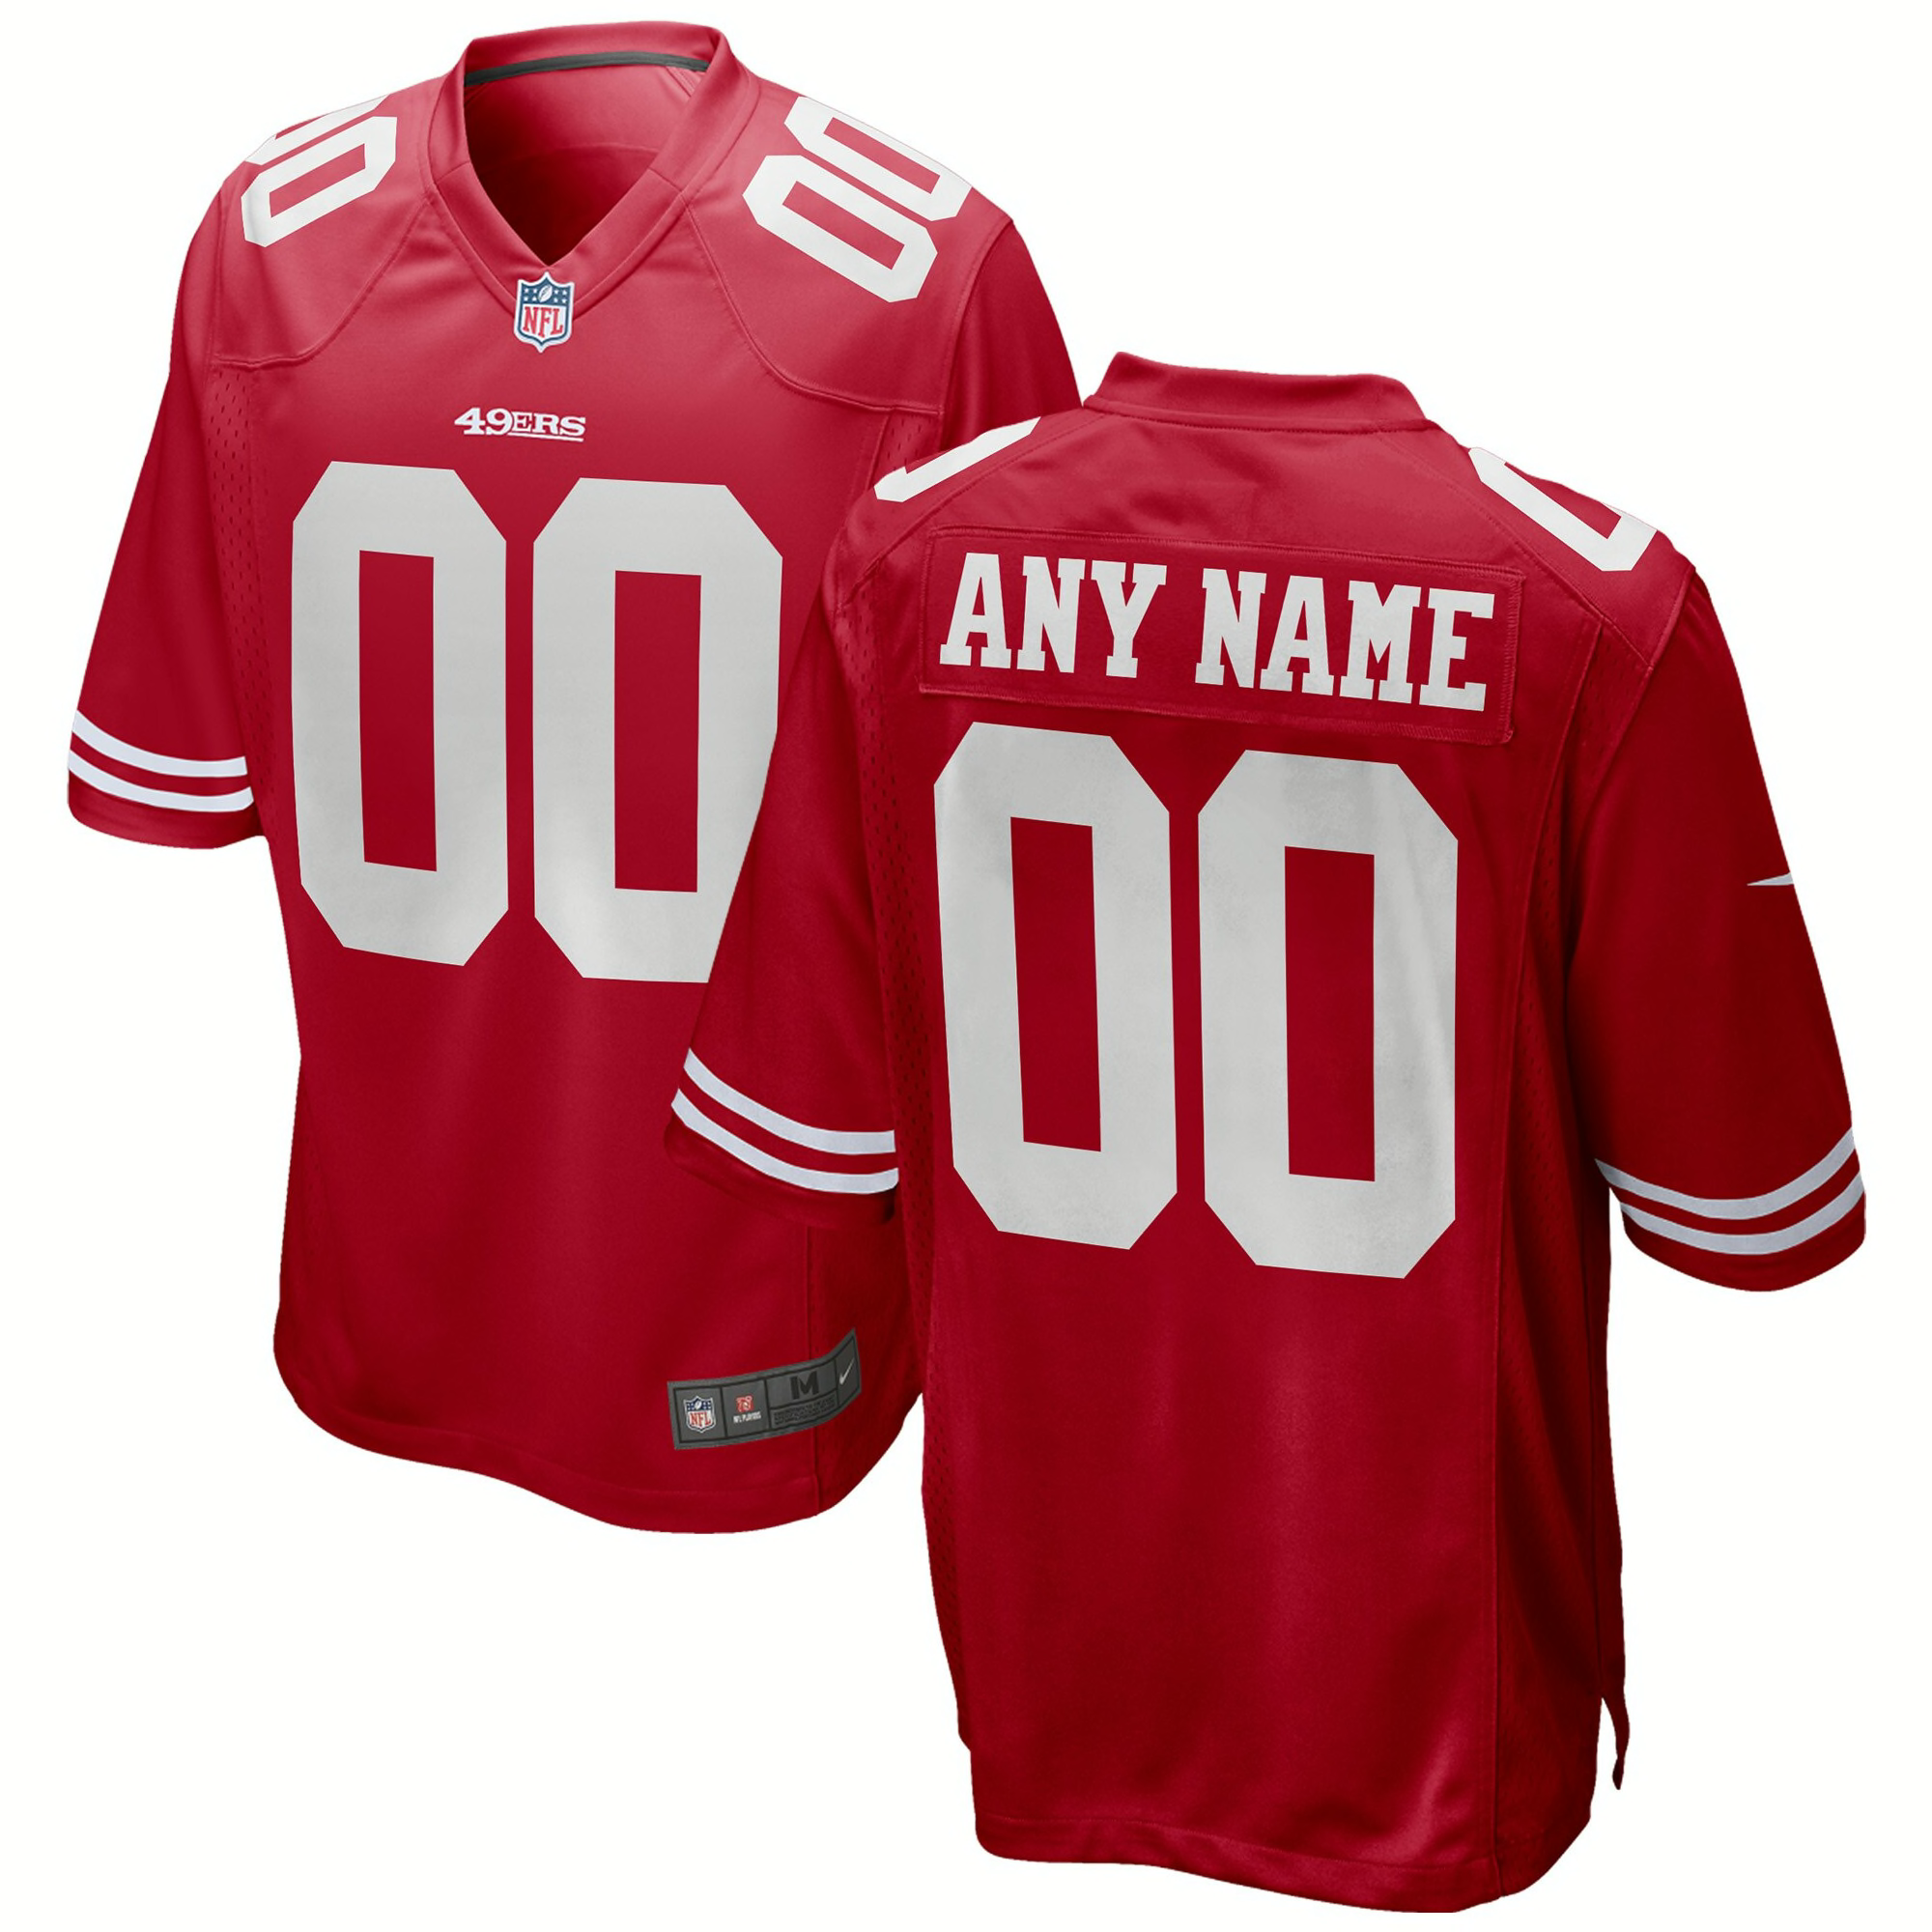 49ers 2020 jersey